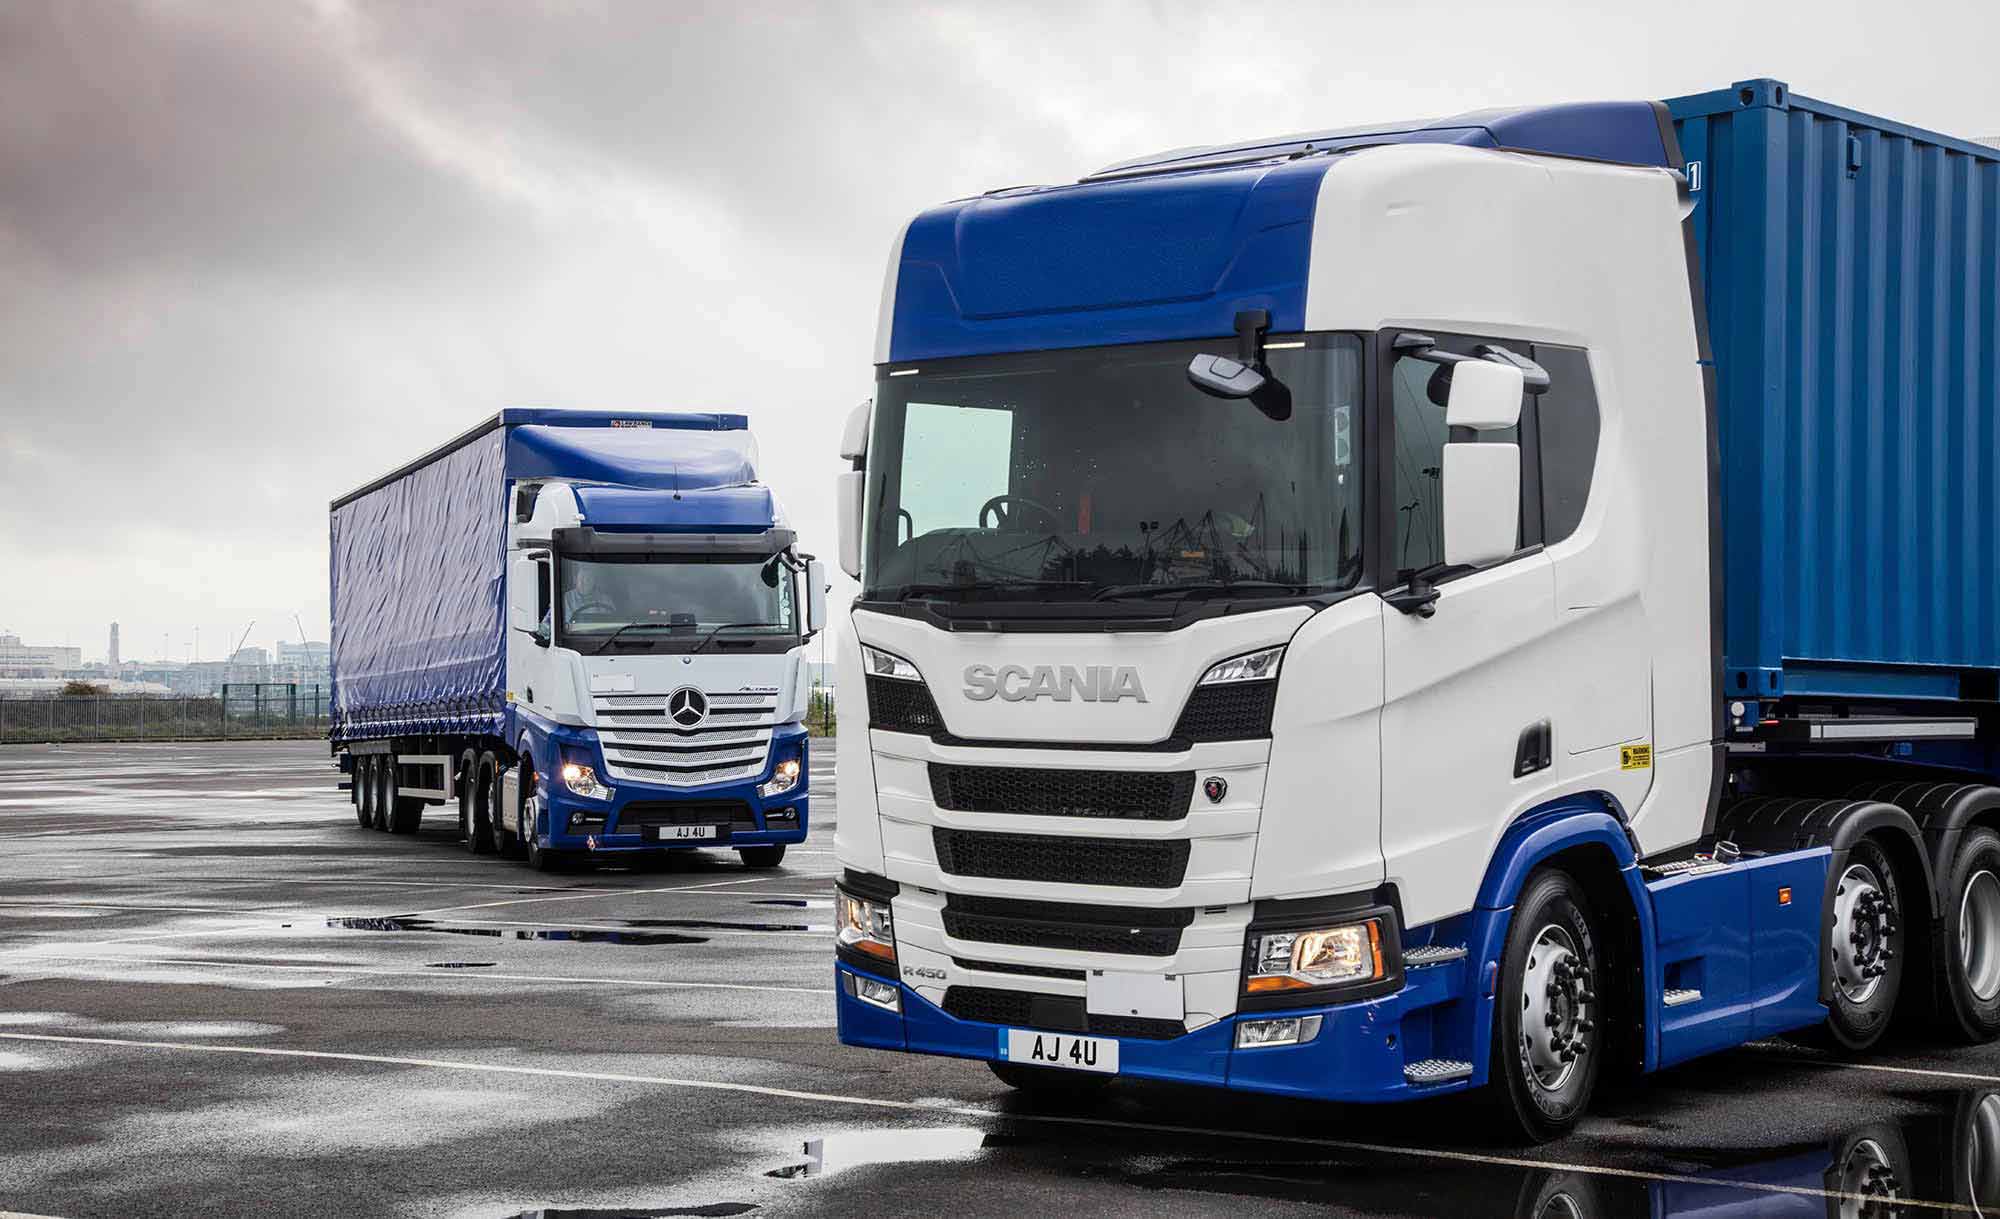 HGV Insurance For New Drivers – A Guide